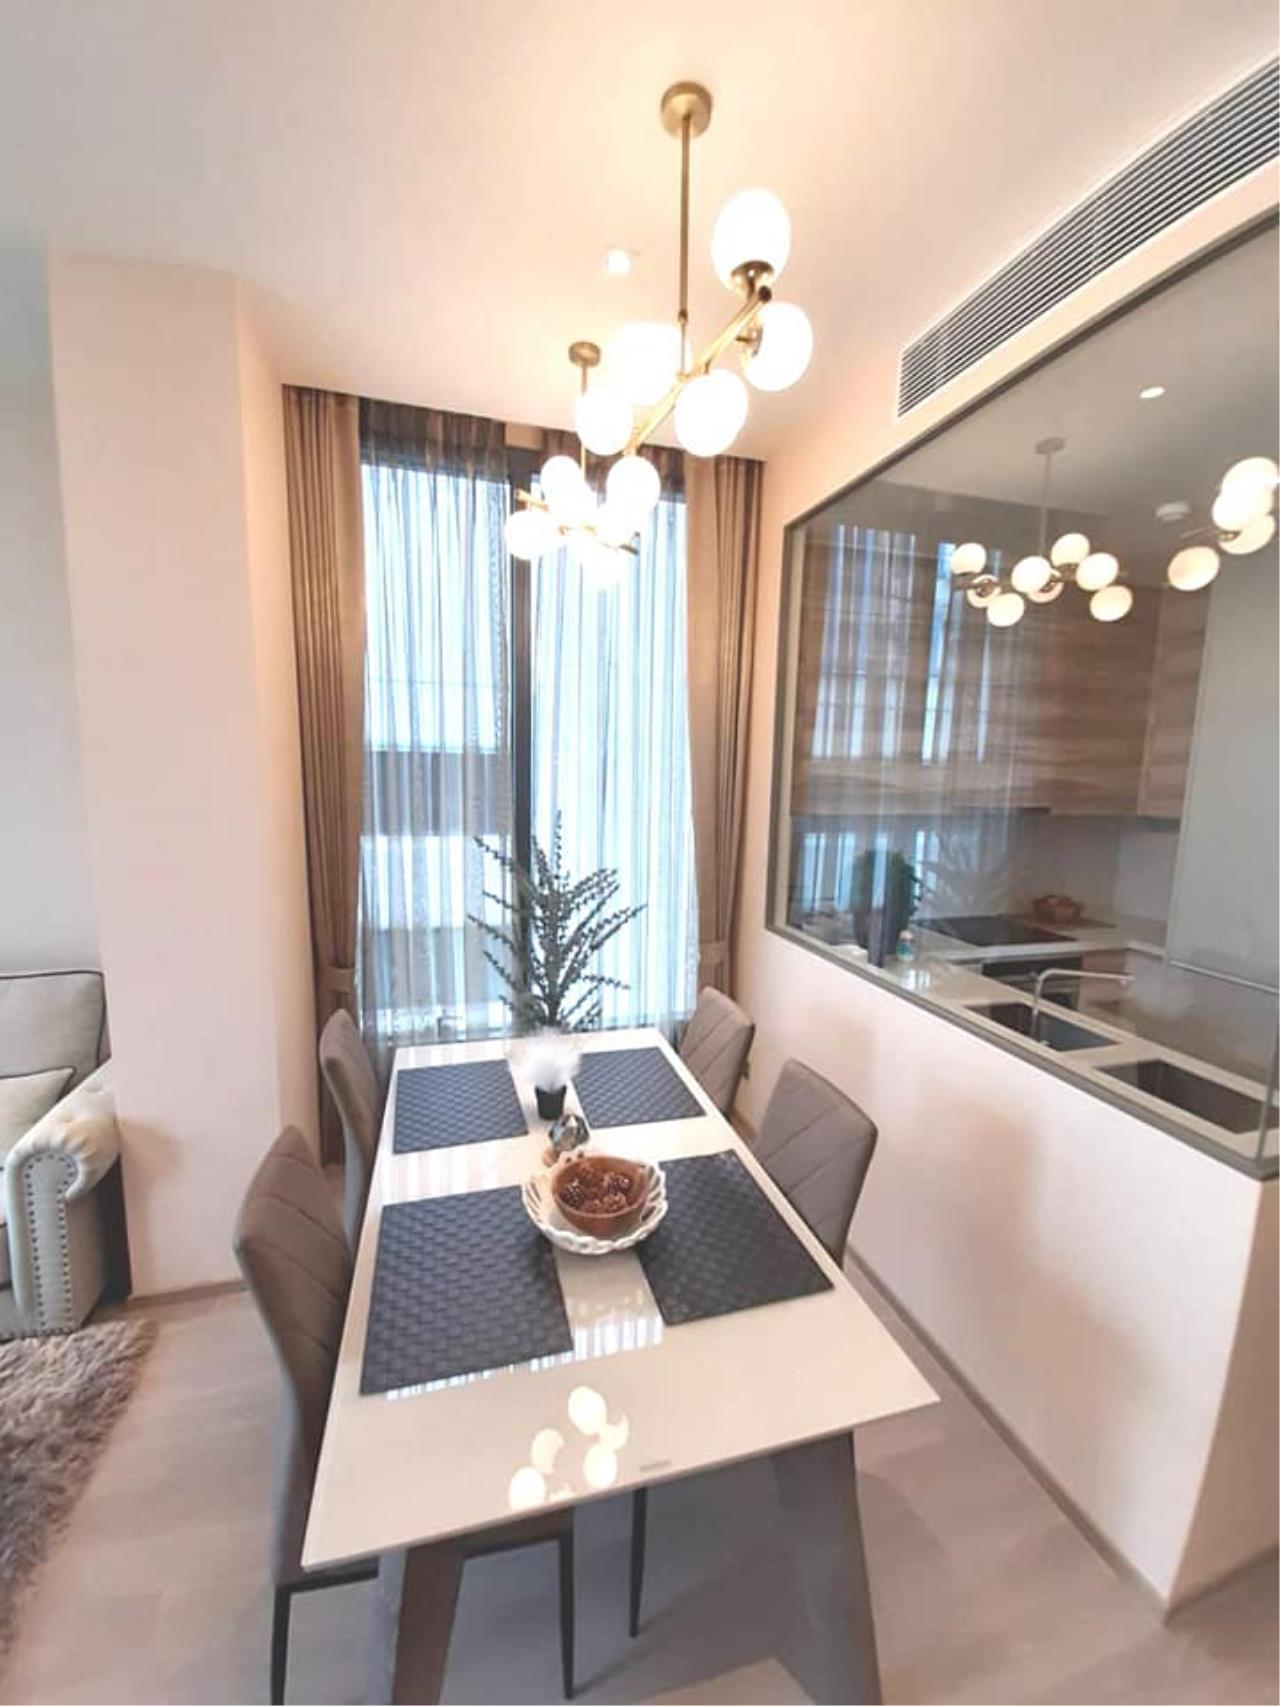 The ESSE Asoke - 90 SQM - For Rent 89000 THBmonth - 2 Bedrooms, ภาพที่ 4